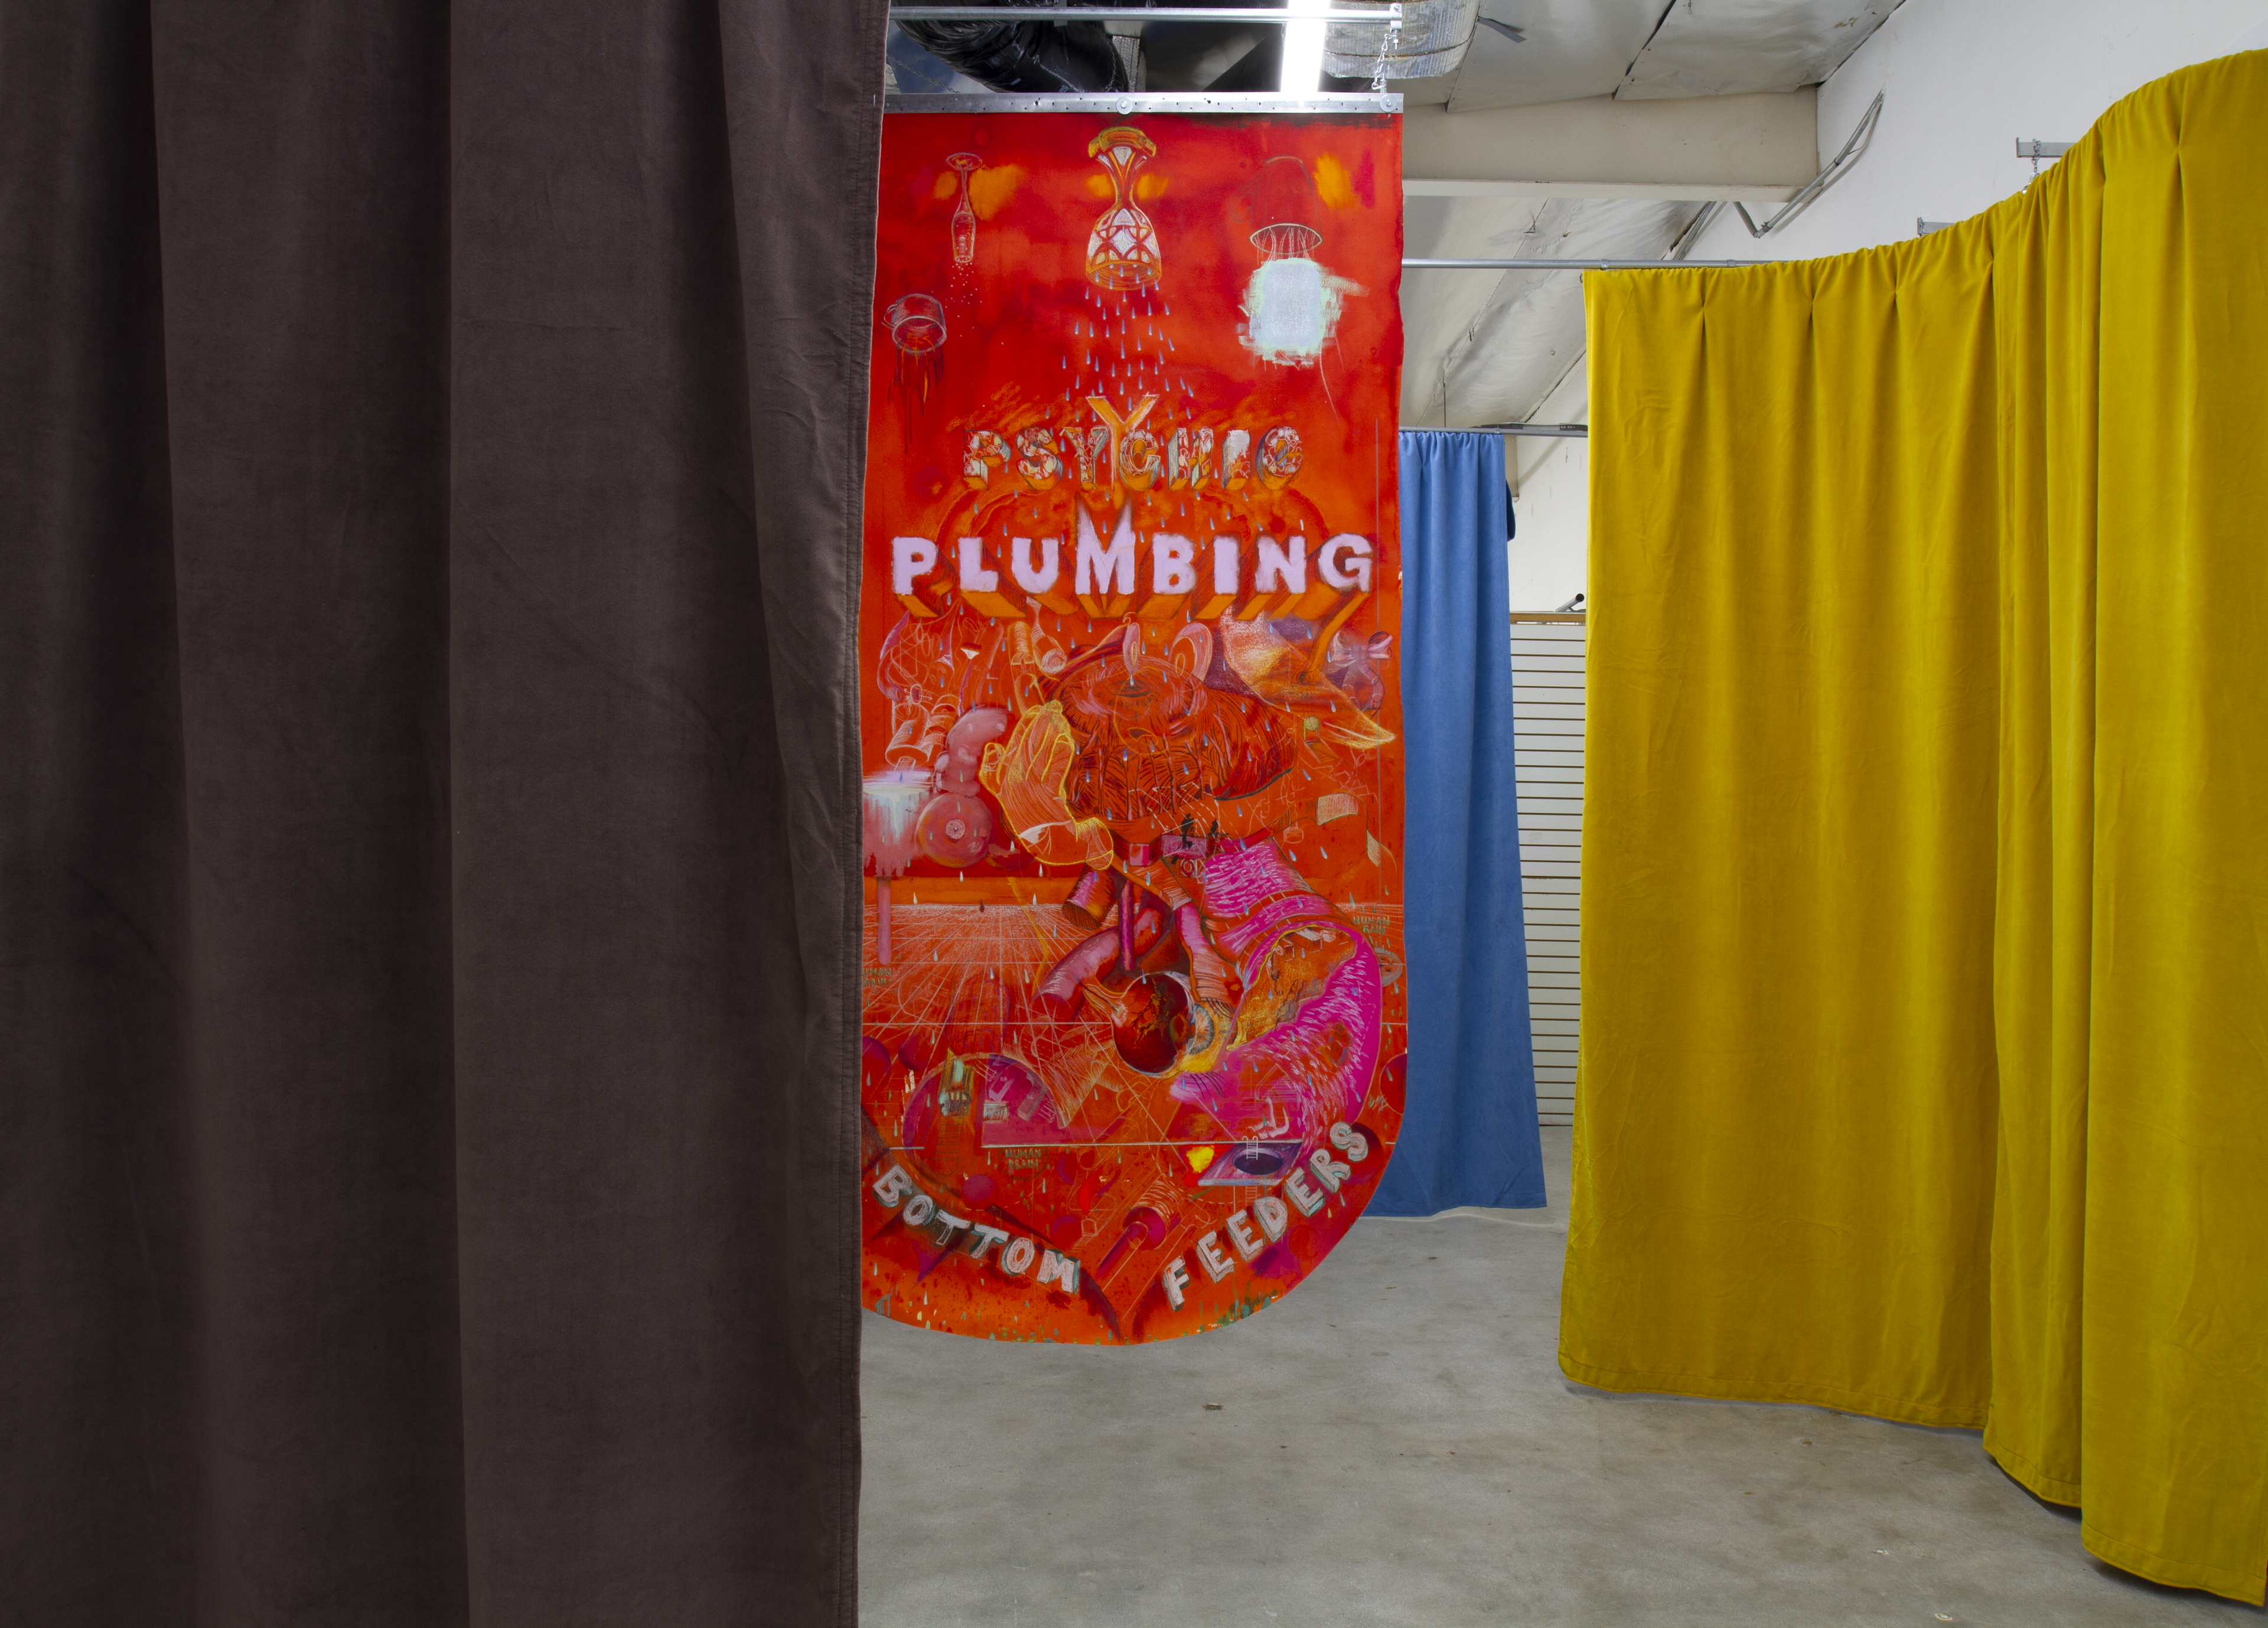 Exhibition documentation of Psychic Plumbing. Curated by Gan Uyeda featuring work by artist Stevie Cisneros Hanley, Sara Ludy, Alison O'Daniel, and Phil Peters. Exhibited at Canary Test gallery in Los Angeles, 2020